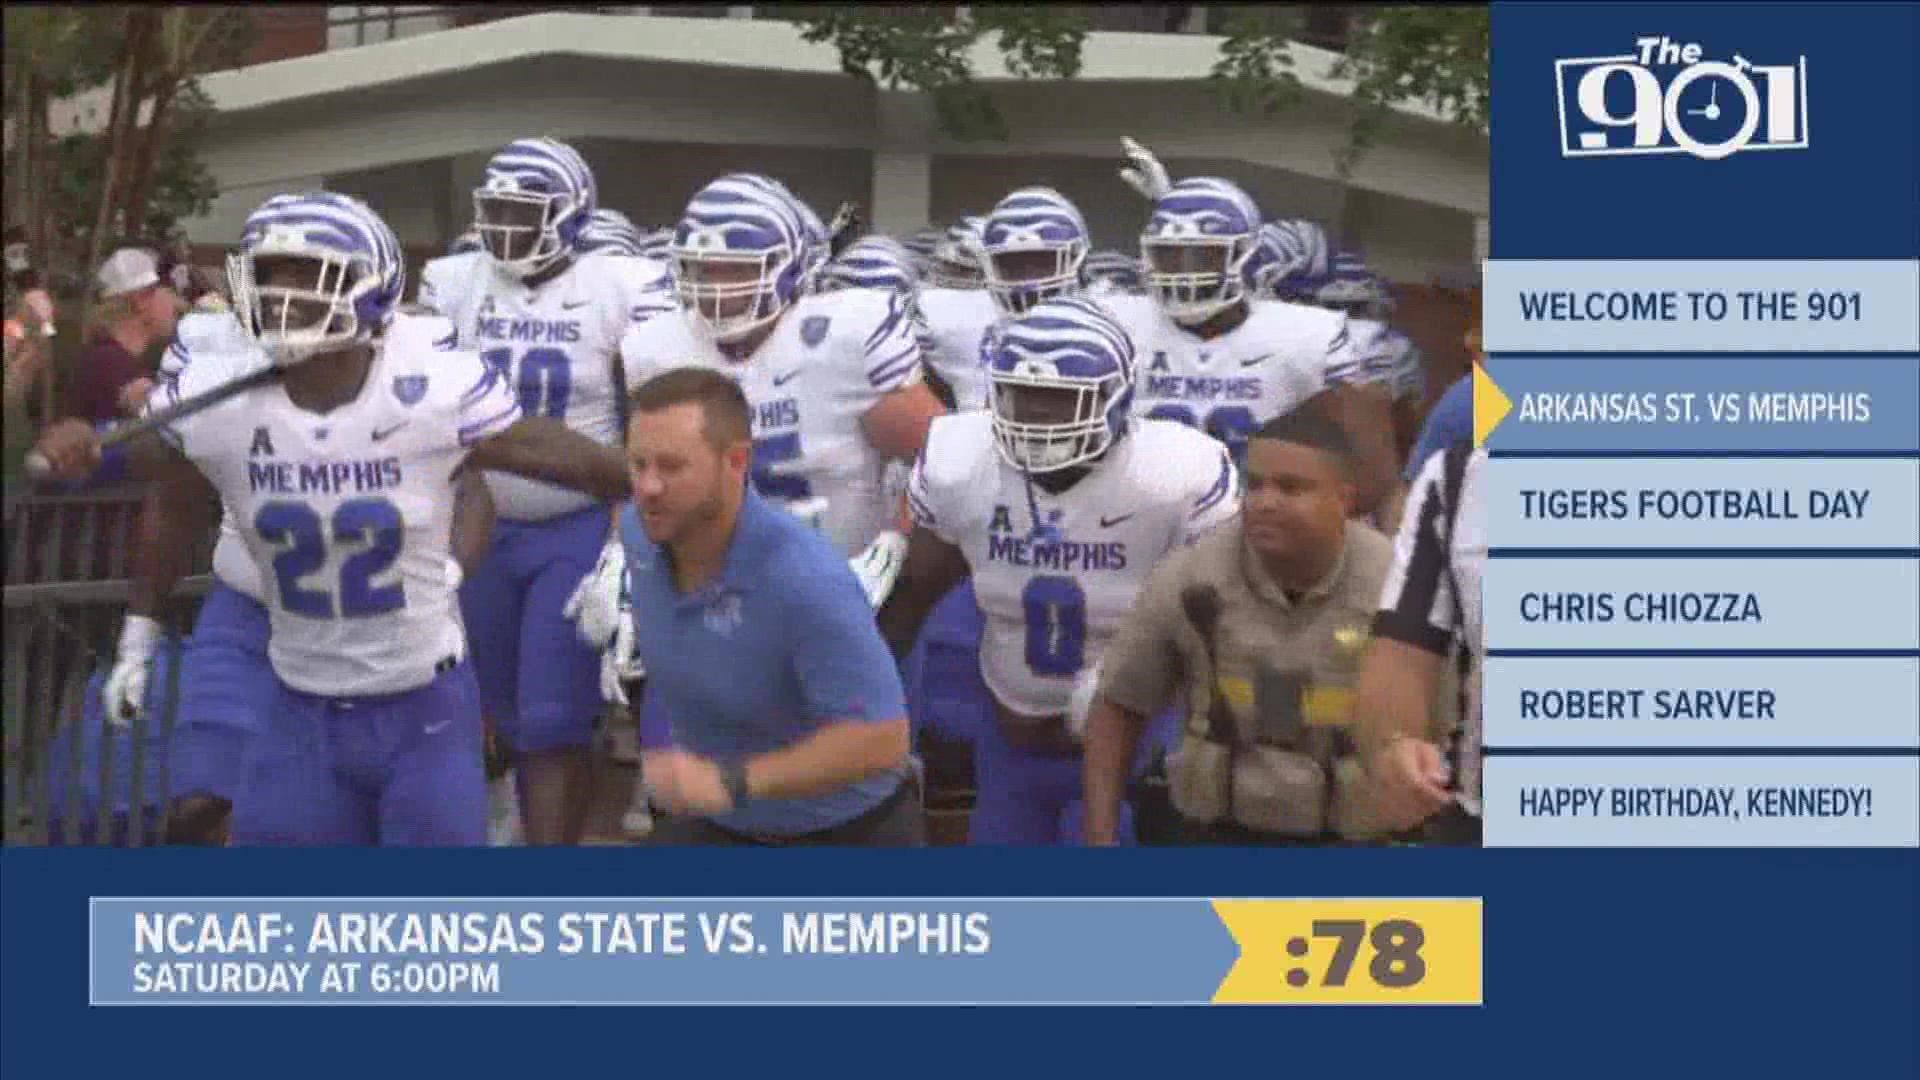 Clayton Collier gets you up to speed on everything Memphis sports in Thursday's episode of The 901.